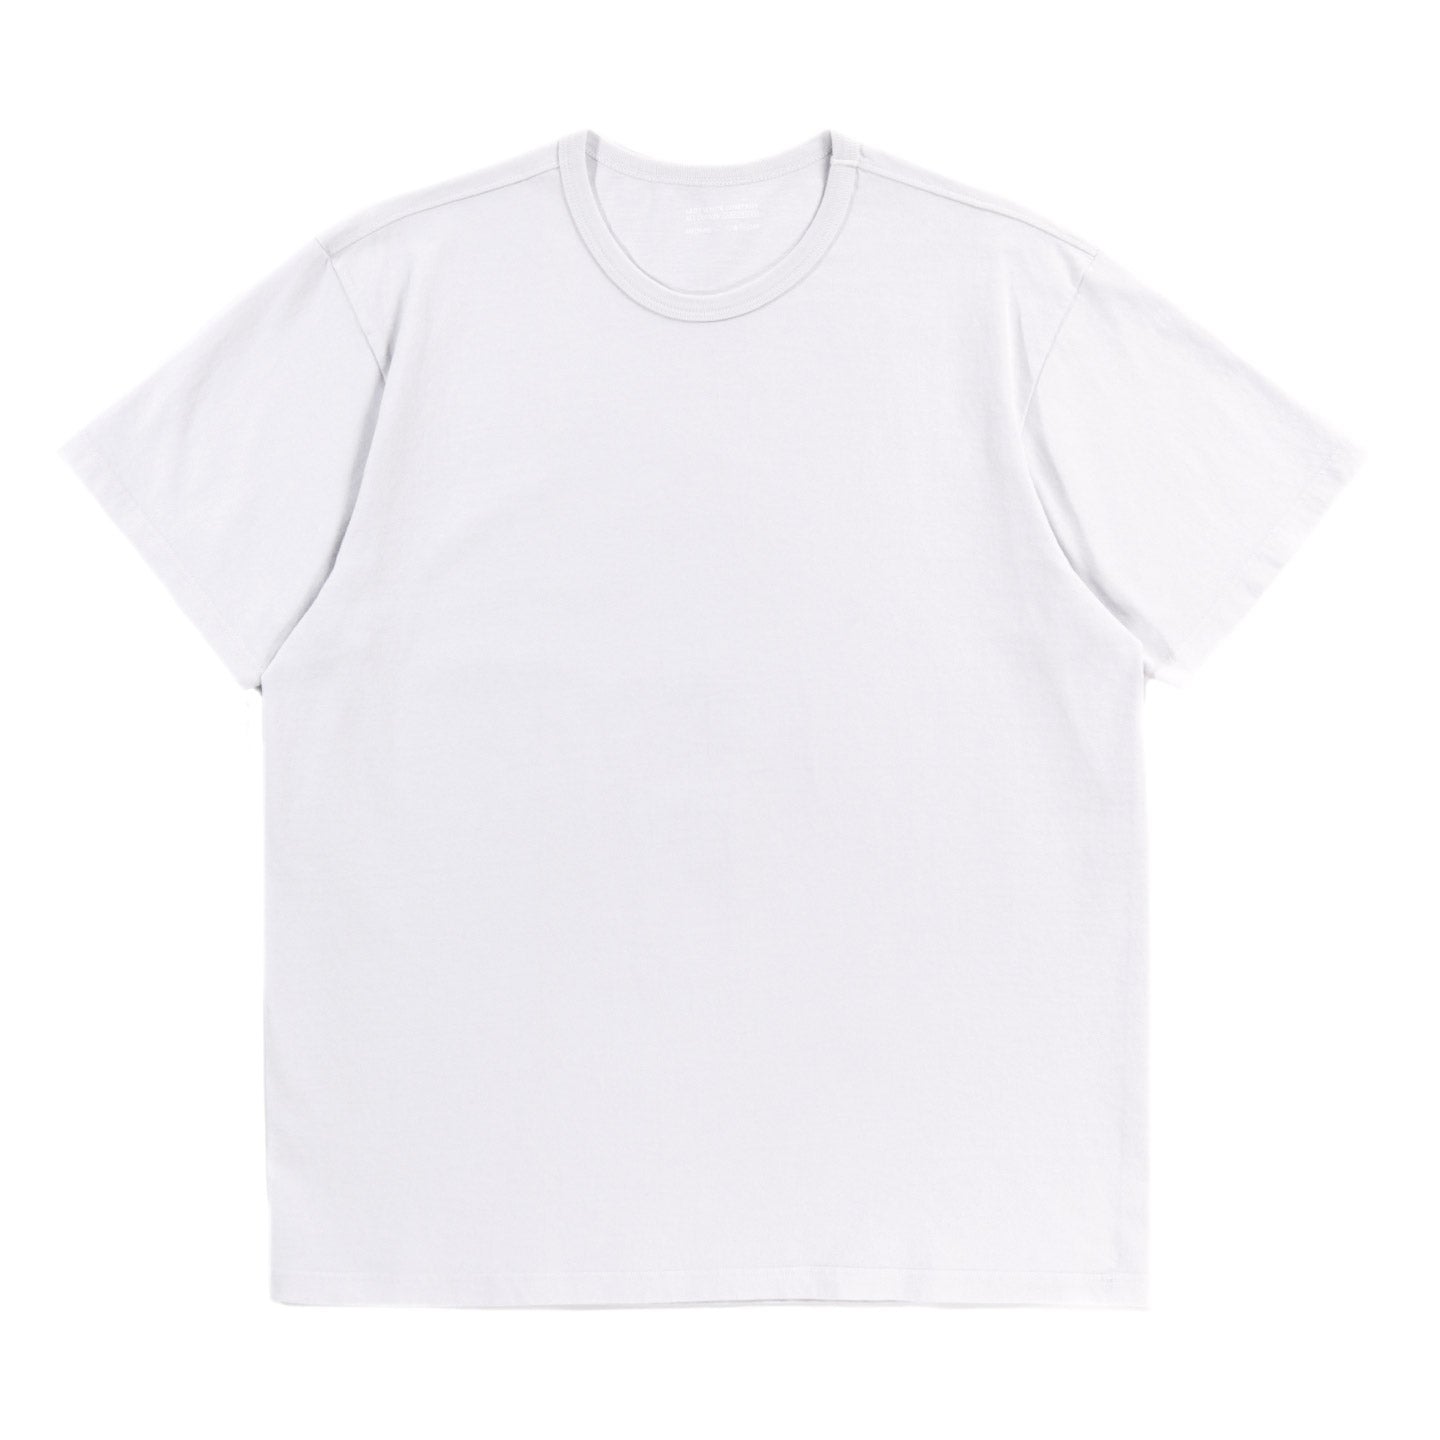 LADY WHITE CO. T-SHIRT 2-PACK ICE